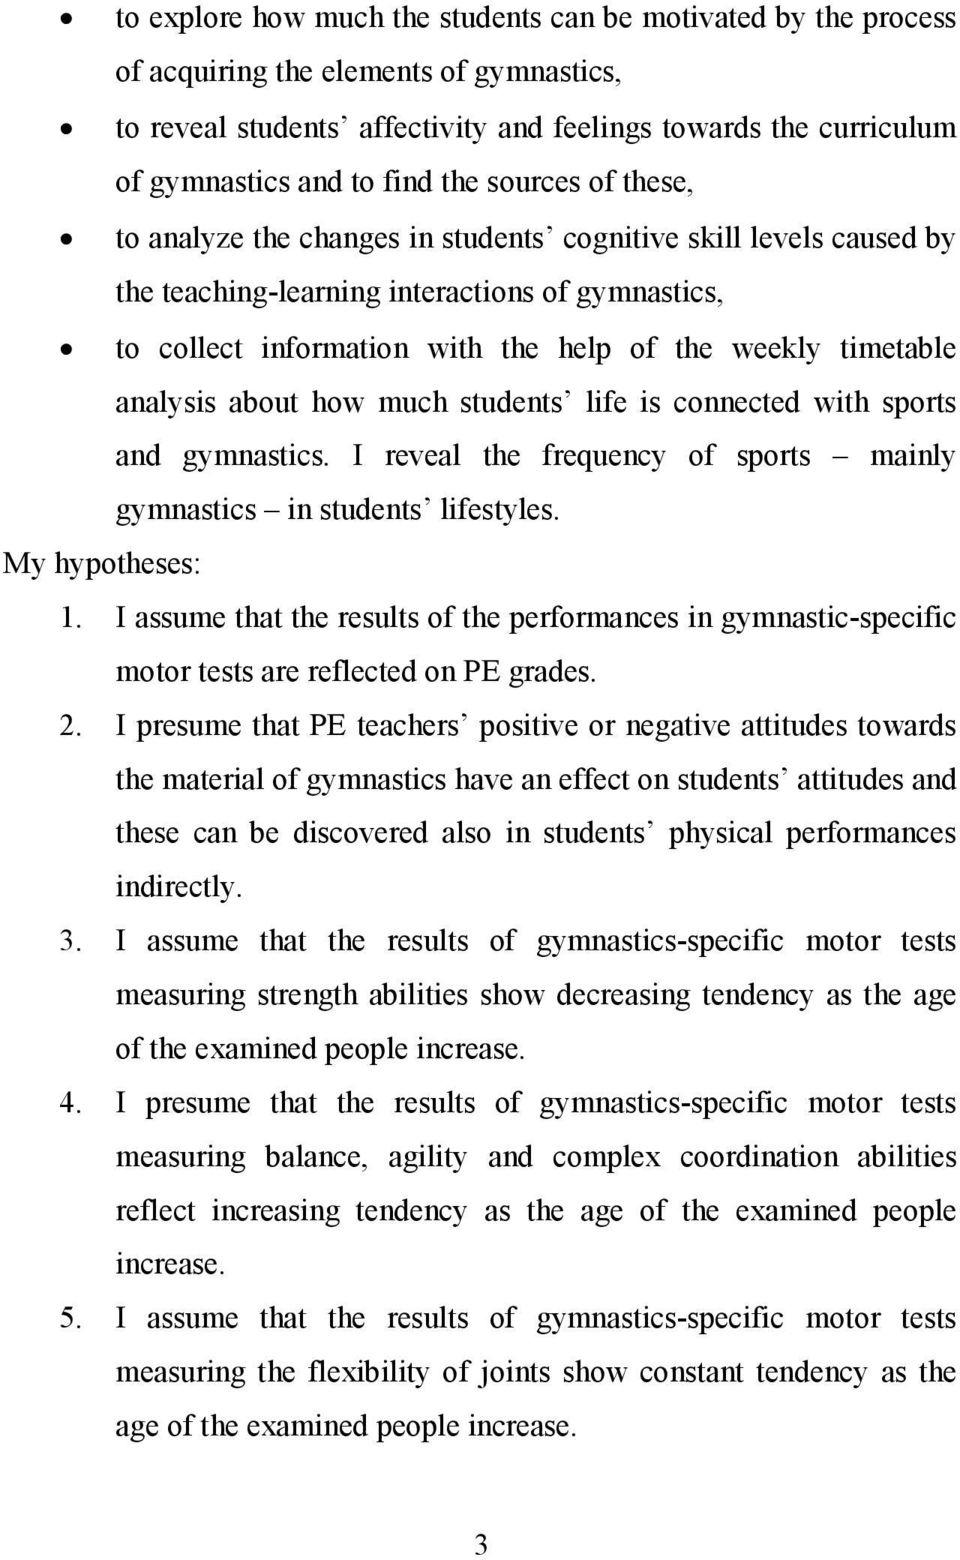 timetable analysis about how much students life is connected with sports and gymnastics. I reveal the frequency of sports mainly gymnastics in students lifestyles. My hypotheses: 1.